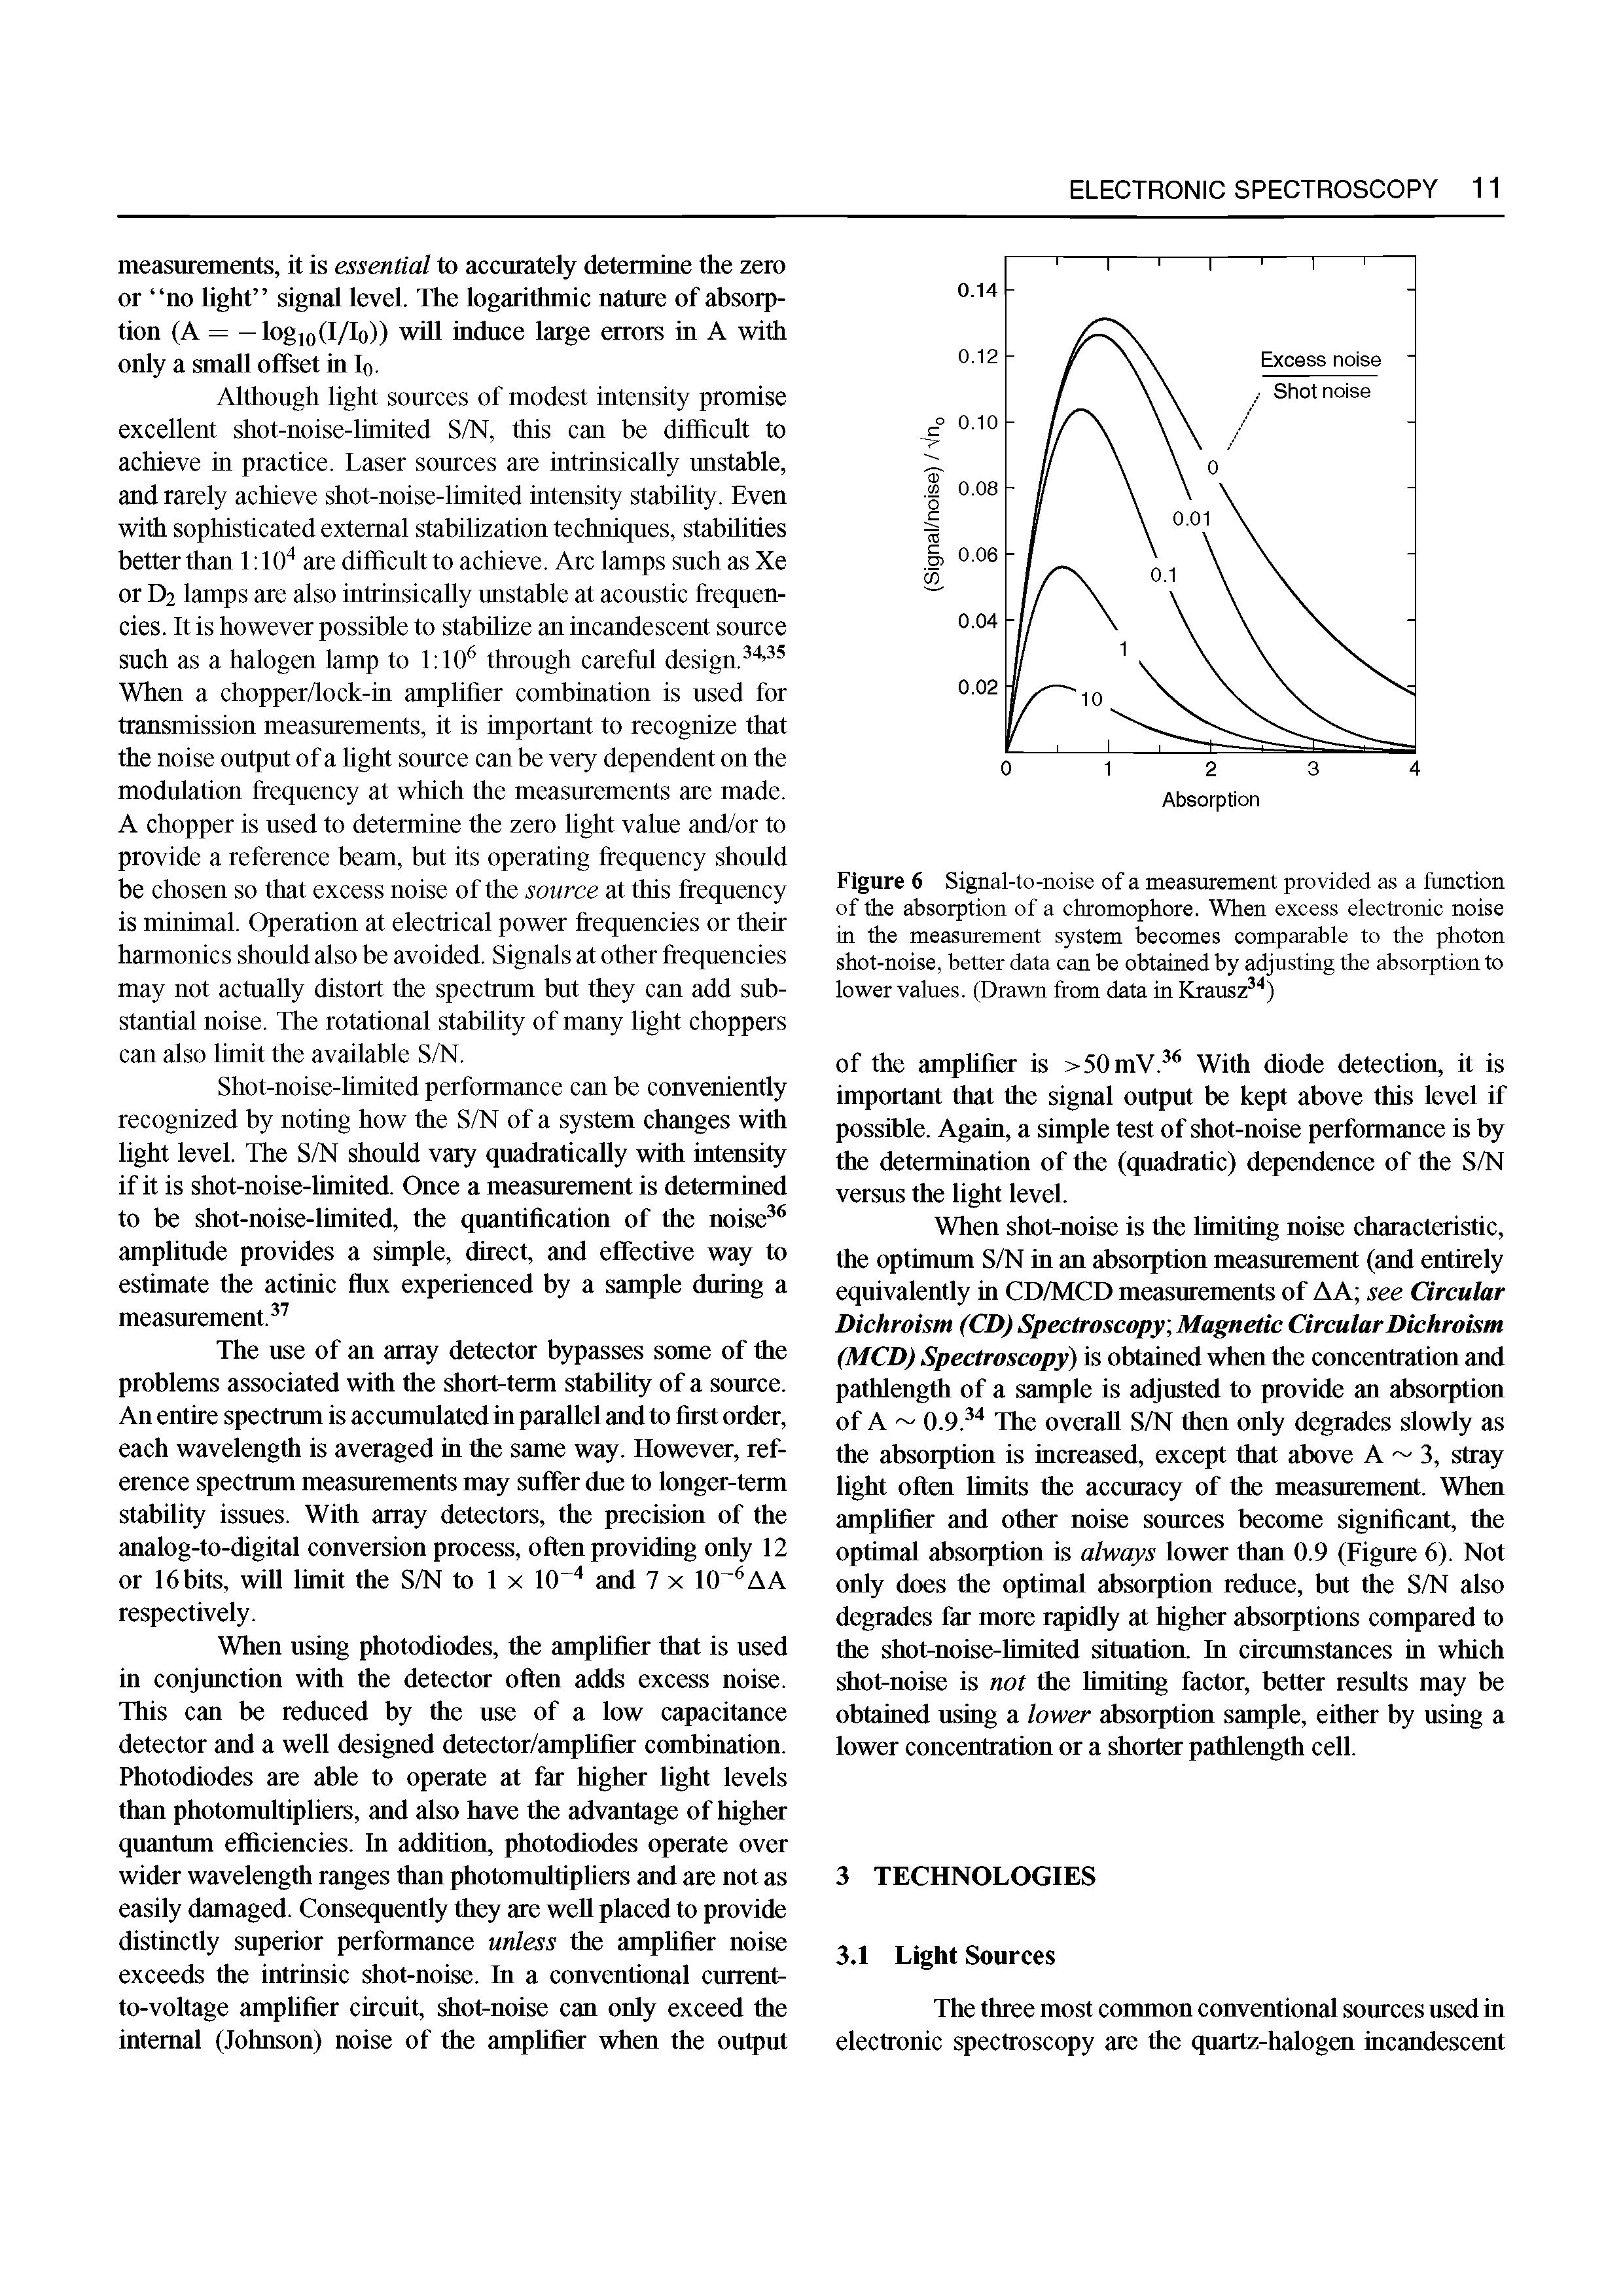 Figure 6 Signal-to-noise of a measurement provided as a function of the absorption of a chromophore. When excess electronic noise in the measurement system becomes comparable to the photon shot-noise, better data can be obtained by adjusting the absorption to lower values. (Drawn from data in Krausz )...